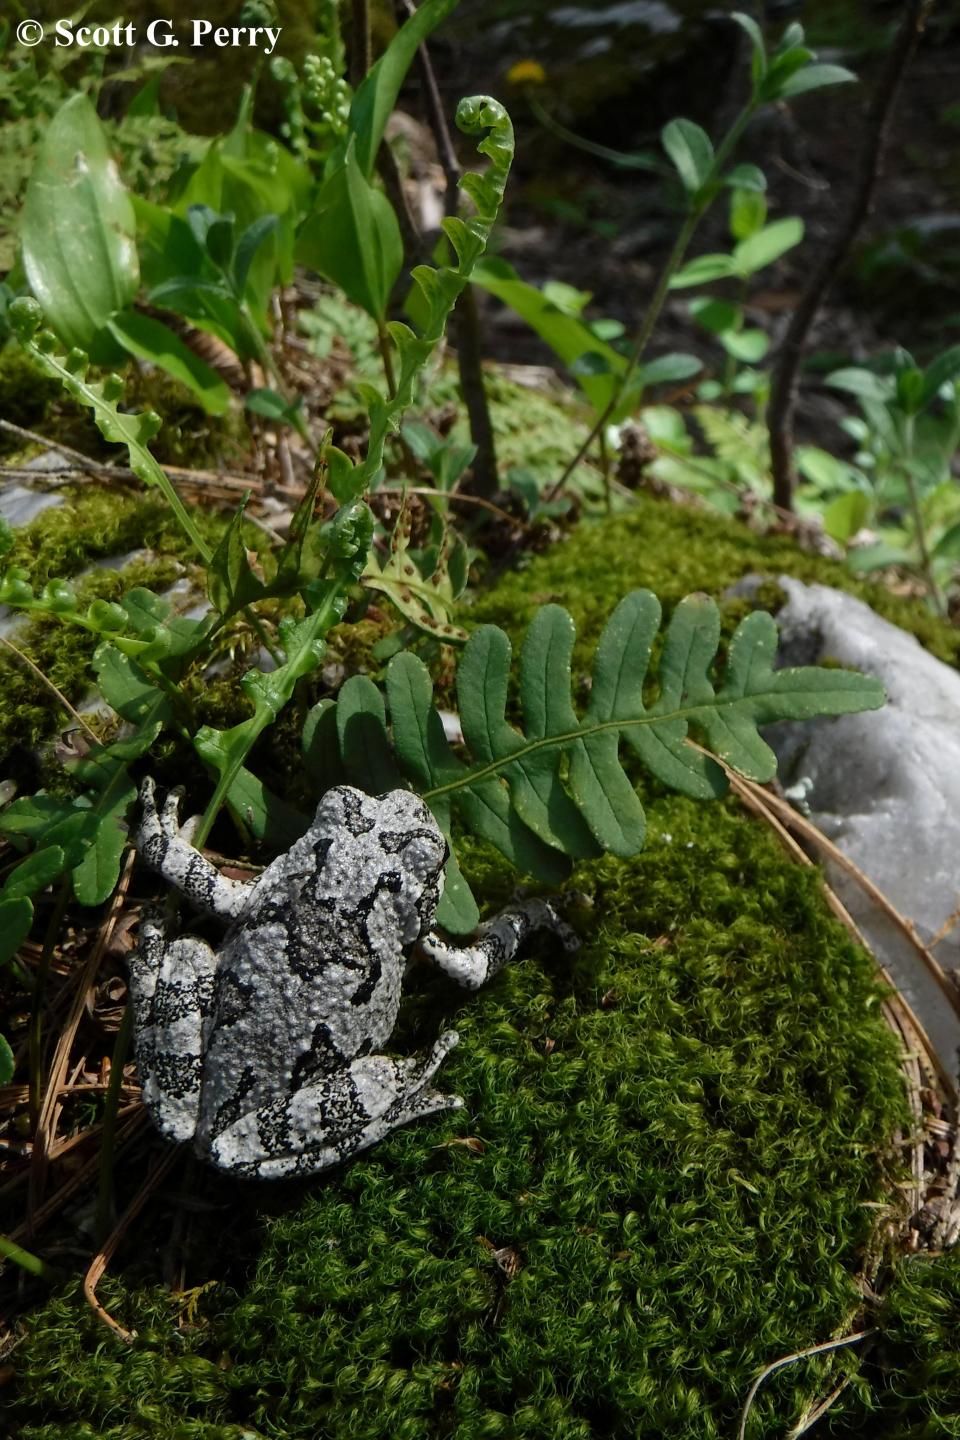 Gray Tree Frog on moss covered rock with fern fronds.